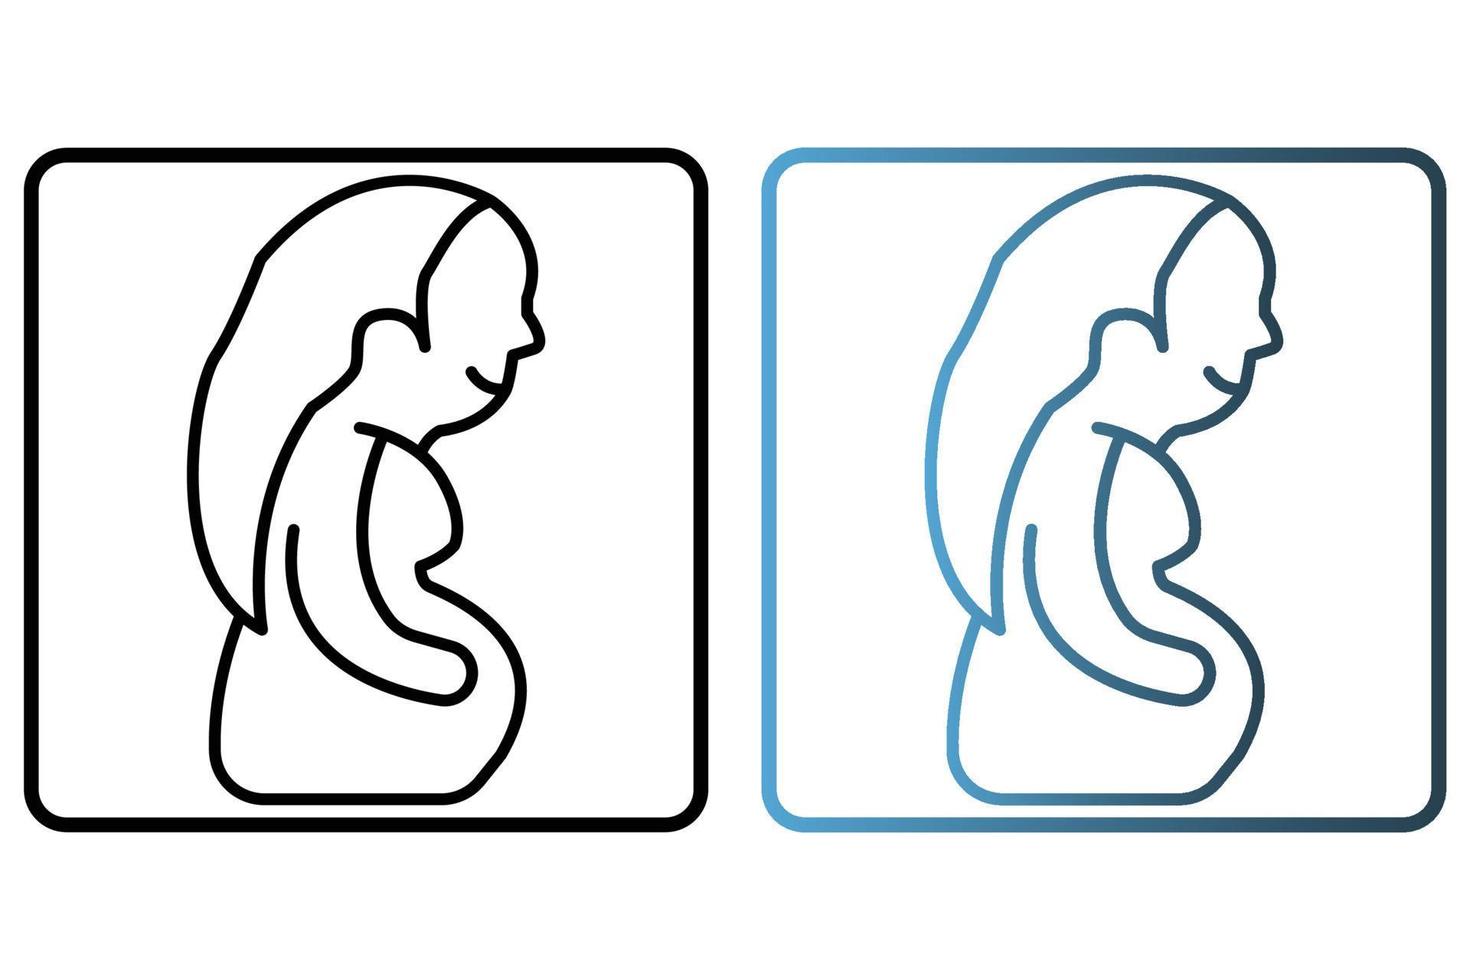 Pregnant icon illustration. icon related to baby care. outline icon style. Simple vector design editable